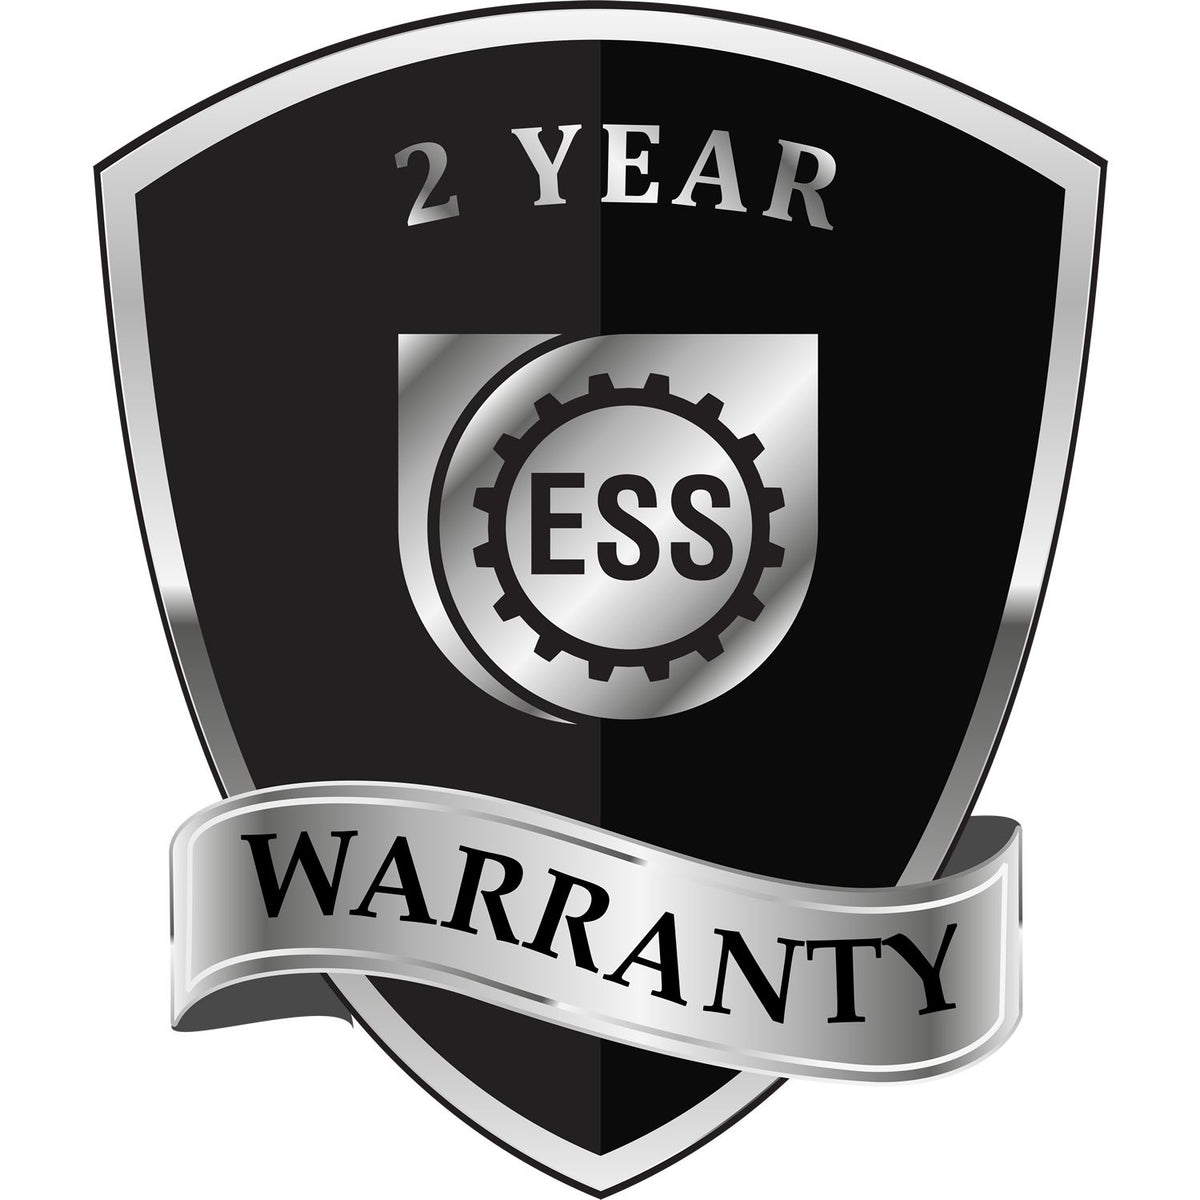 A black and silver badge or emblem showing warranty information for the Hybrid Idaho Land Surveyor Seal